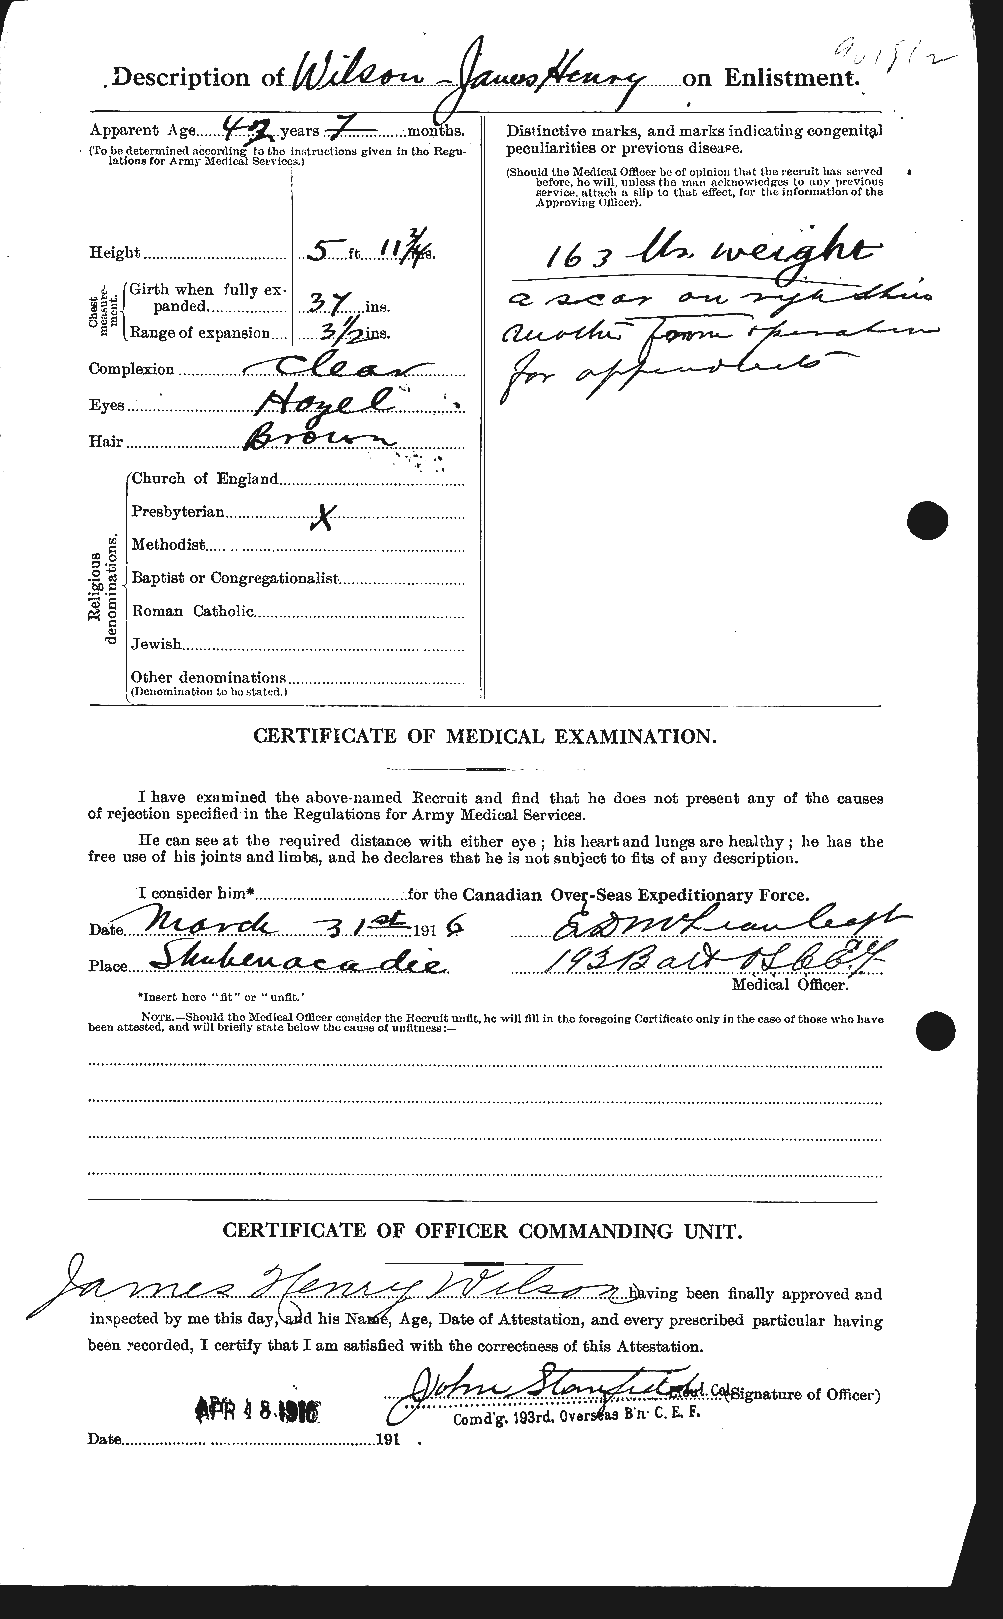 Personnel Records of the First World War - CEF 681468b